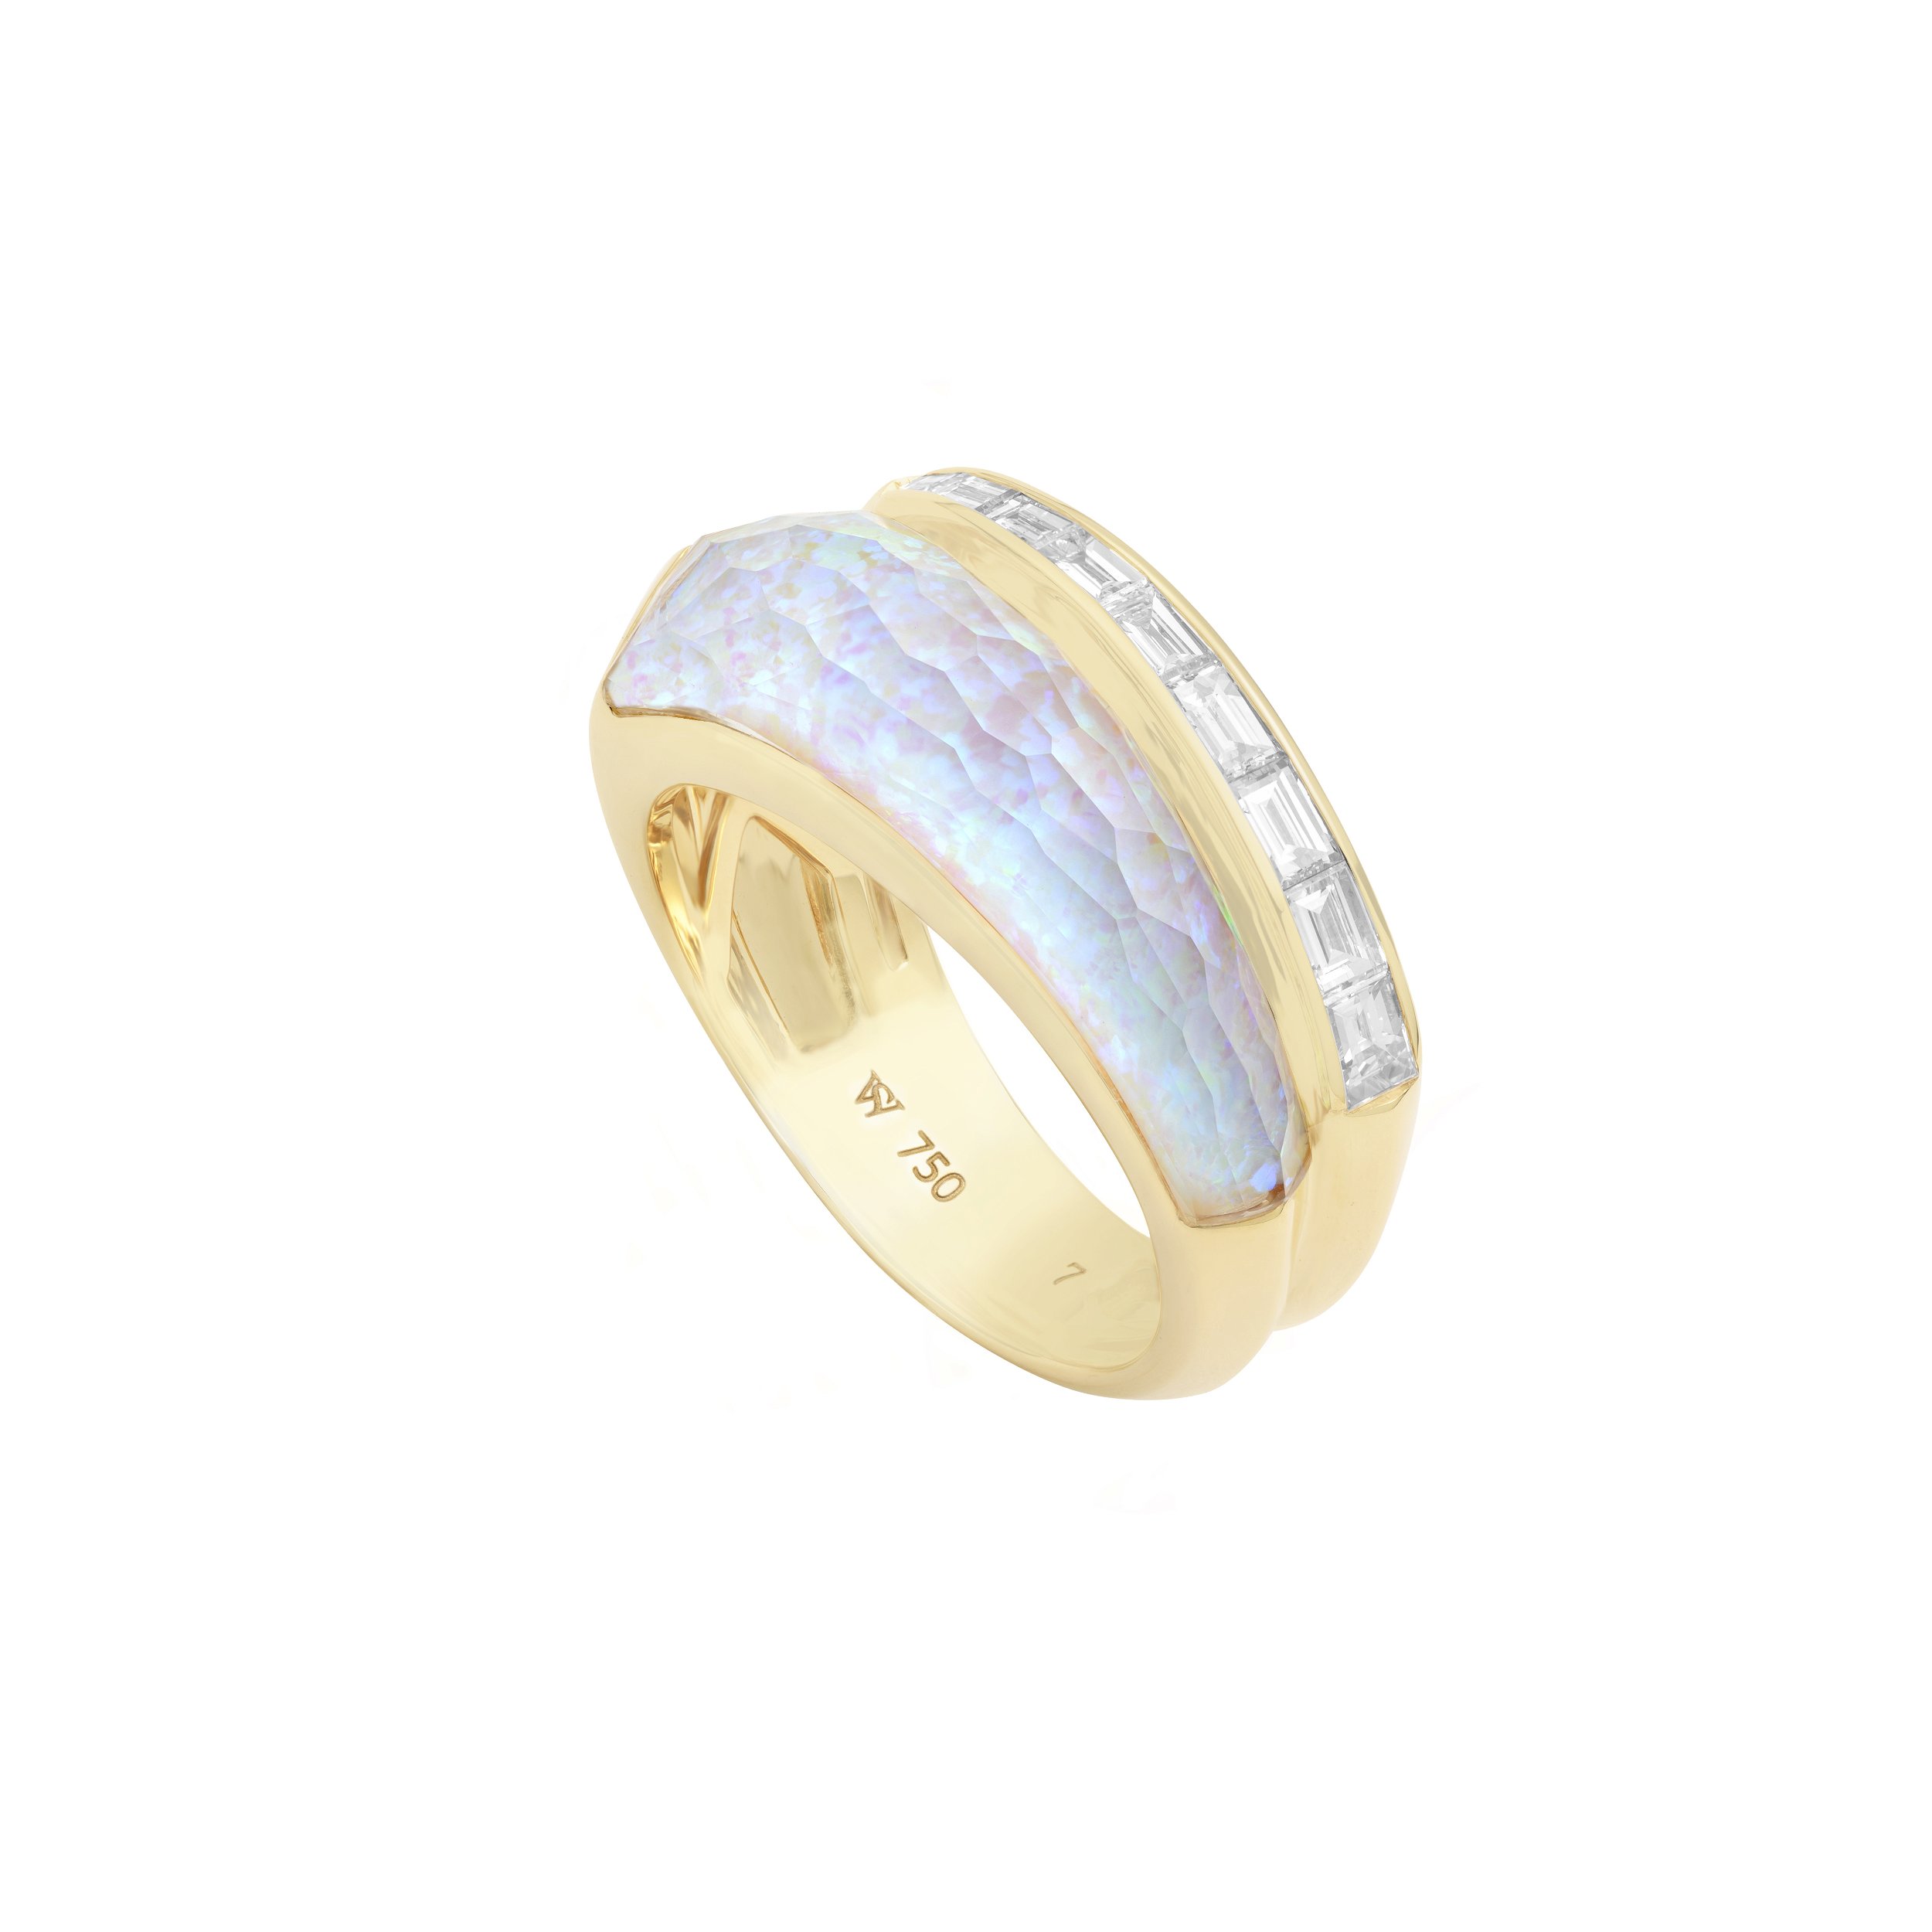 CH2 Shard Slimline Stack Ring with White Opalescent and White Diamonds in 18kt Yellow Gold